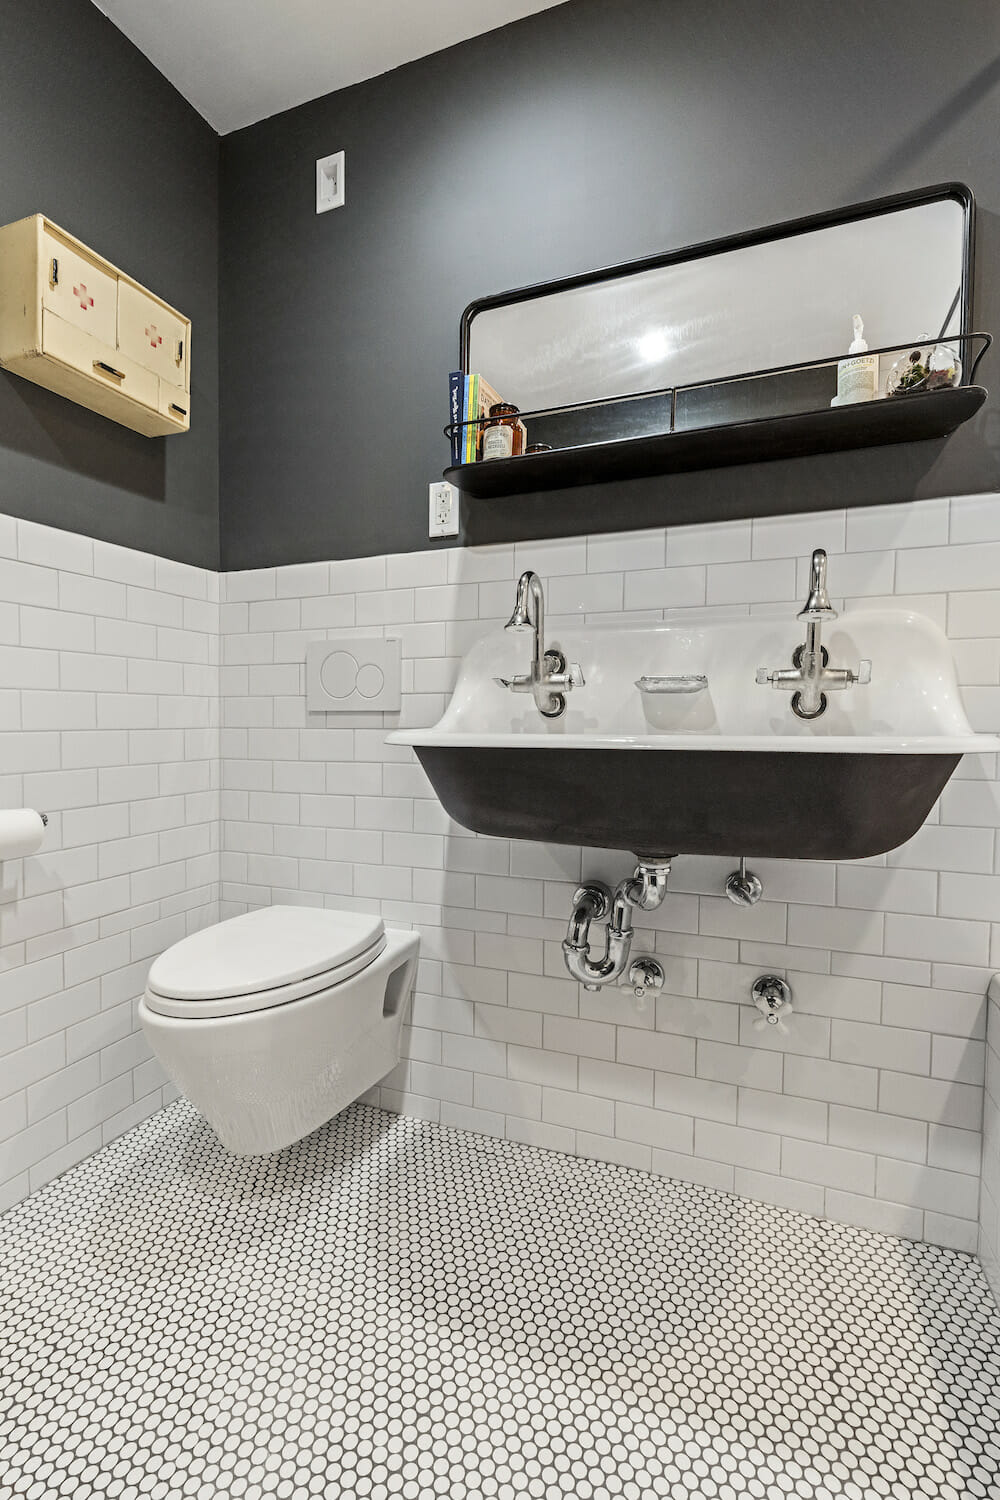 Bathroom Tiles And How Much They Cost, Black Subway Tile Bathroom Floor